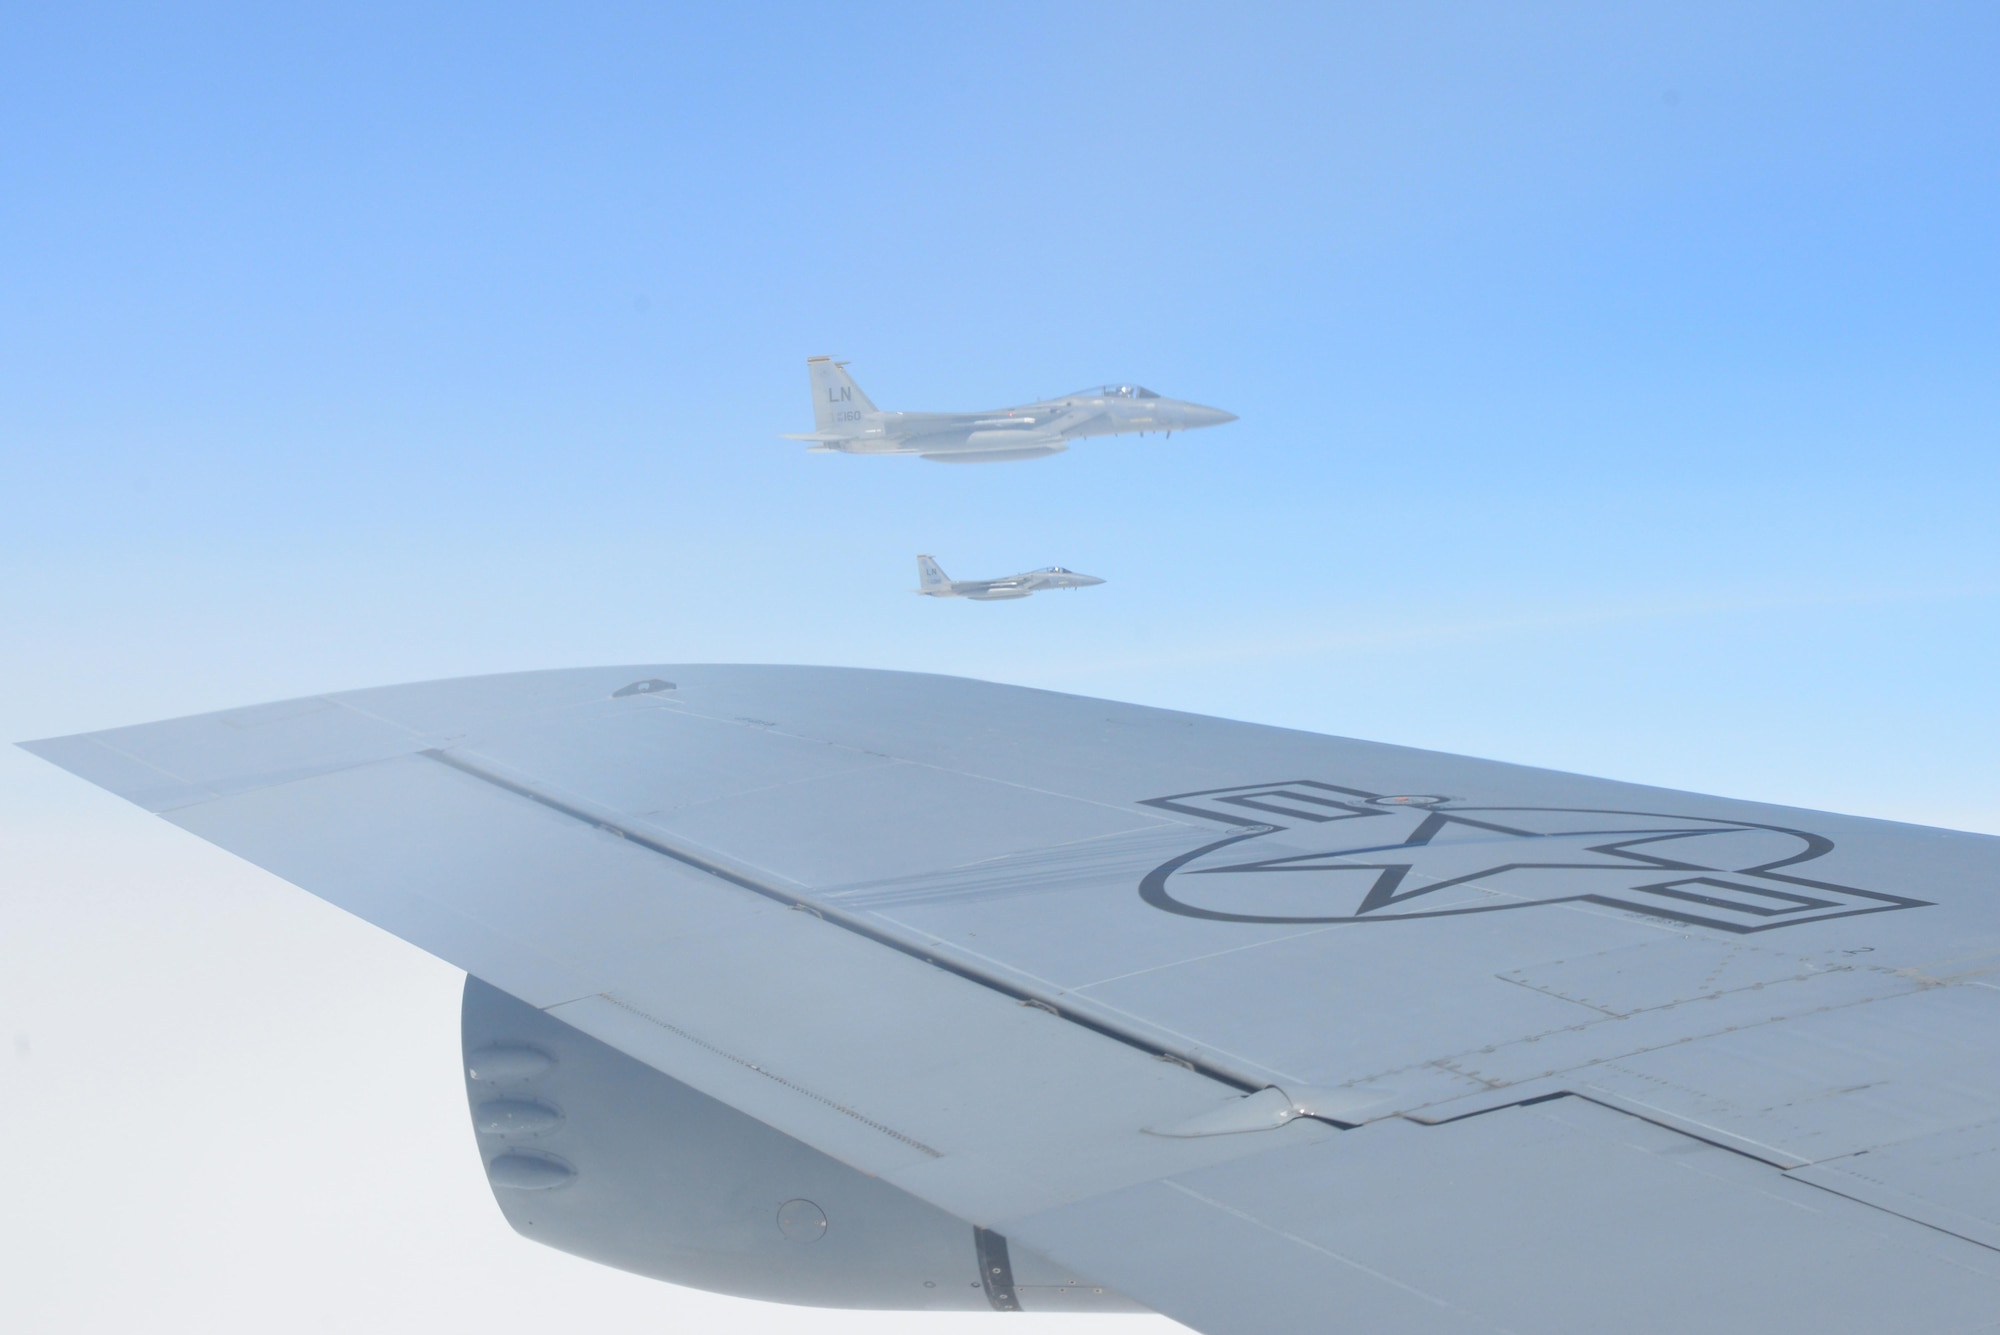 Two F-15 Eagle aircraft from RAF Lakenheath, England, fly in formation next to the KC-135 Stratotanker they just refueled from May 19, 2017. The KC-135 is assigned to RAF Mildenhall, England. All three aircraft are on their way to support Arctic Challenge 2017, a multinational exercise encompassing 11 nations and more than 100 aircraft. (U.S. Air Force photo by Tech. Sgt. David Dobrydney)